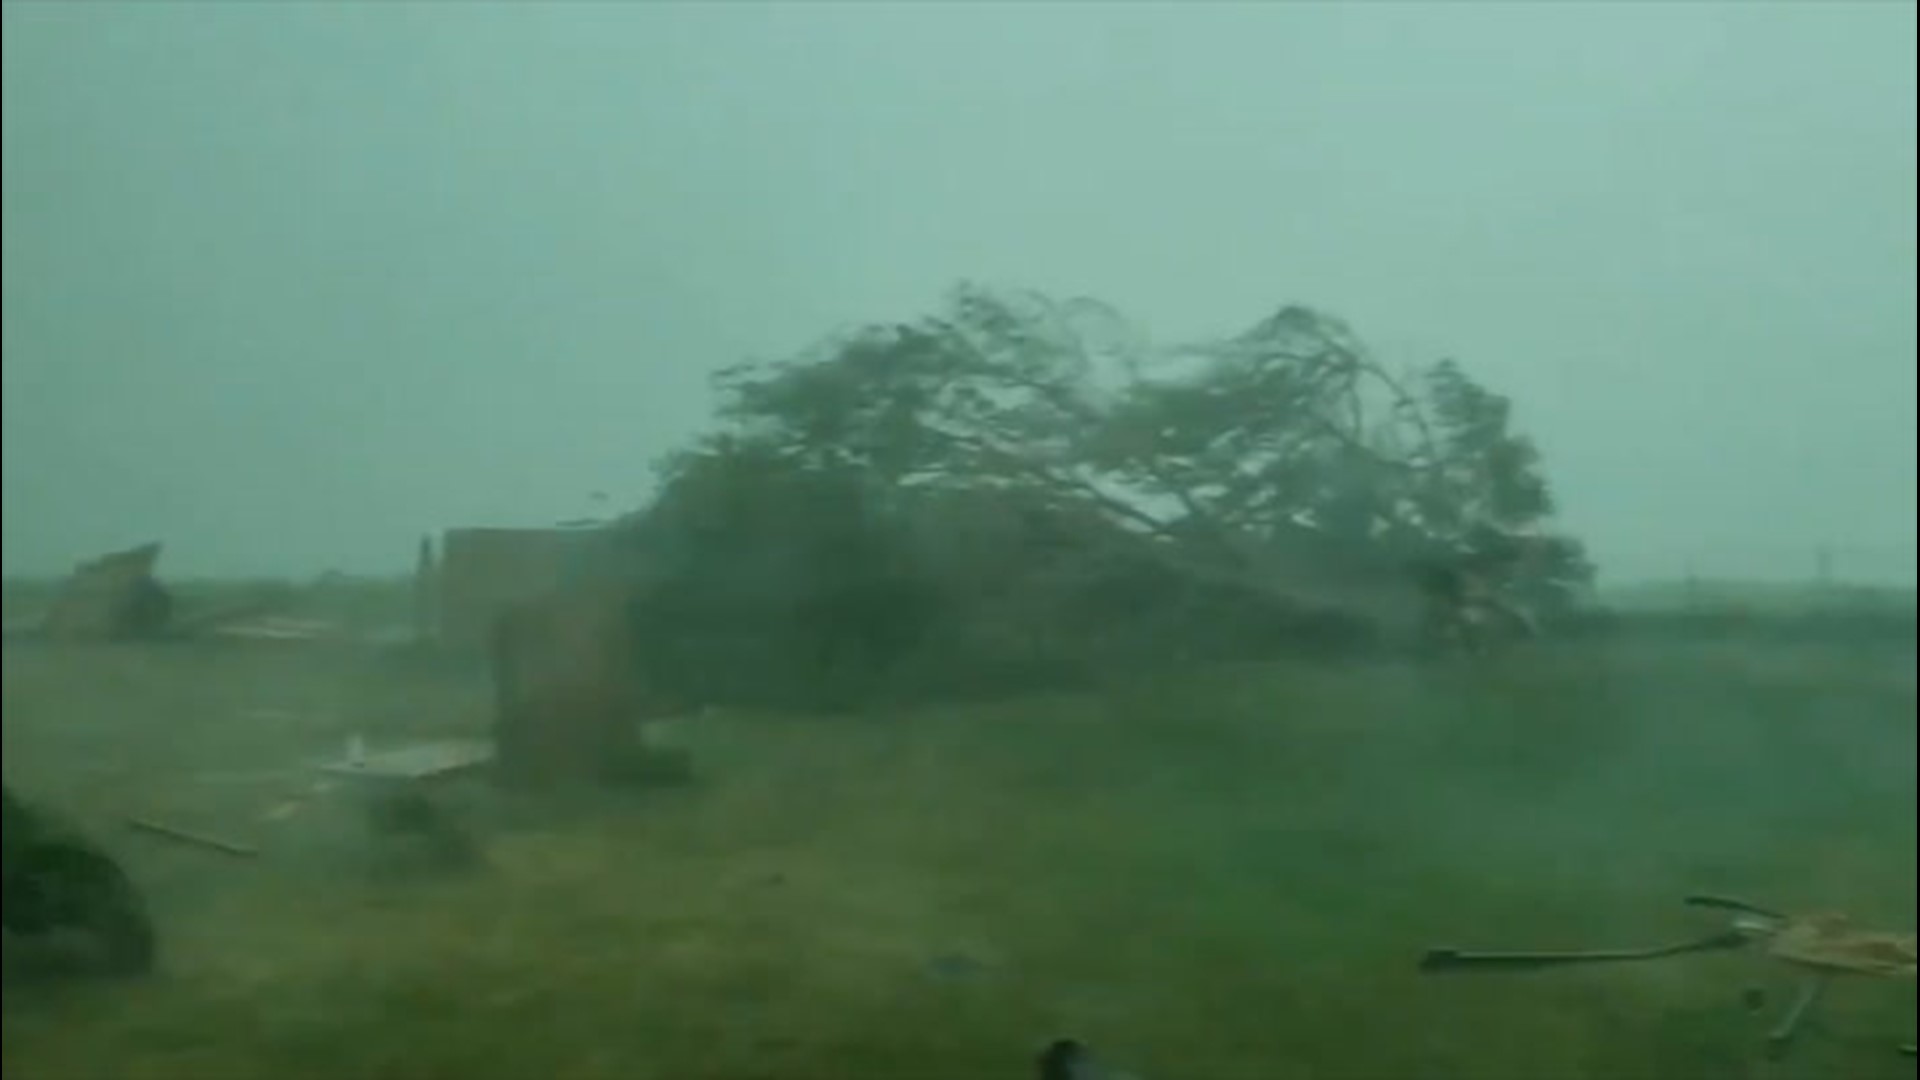 Mike Graber filmed trees getting knocked over by violent winds in Cedar Rapids, Iowa on August 10, after a strong derecho moved through.